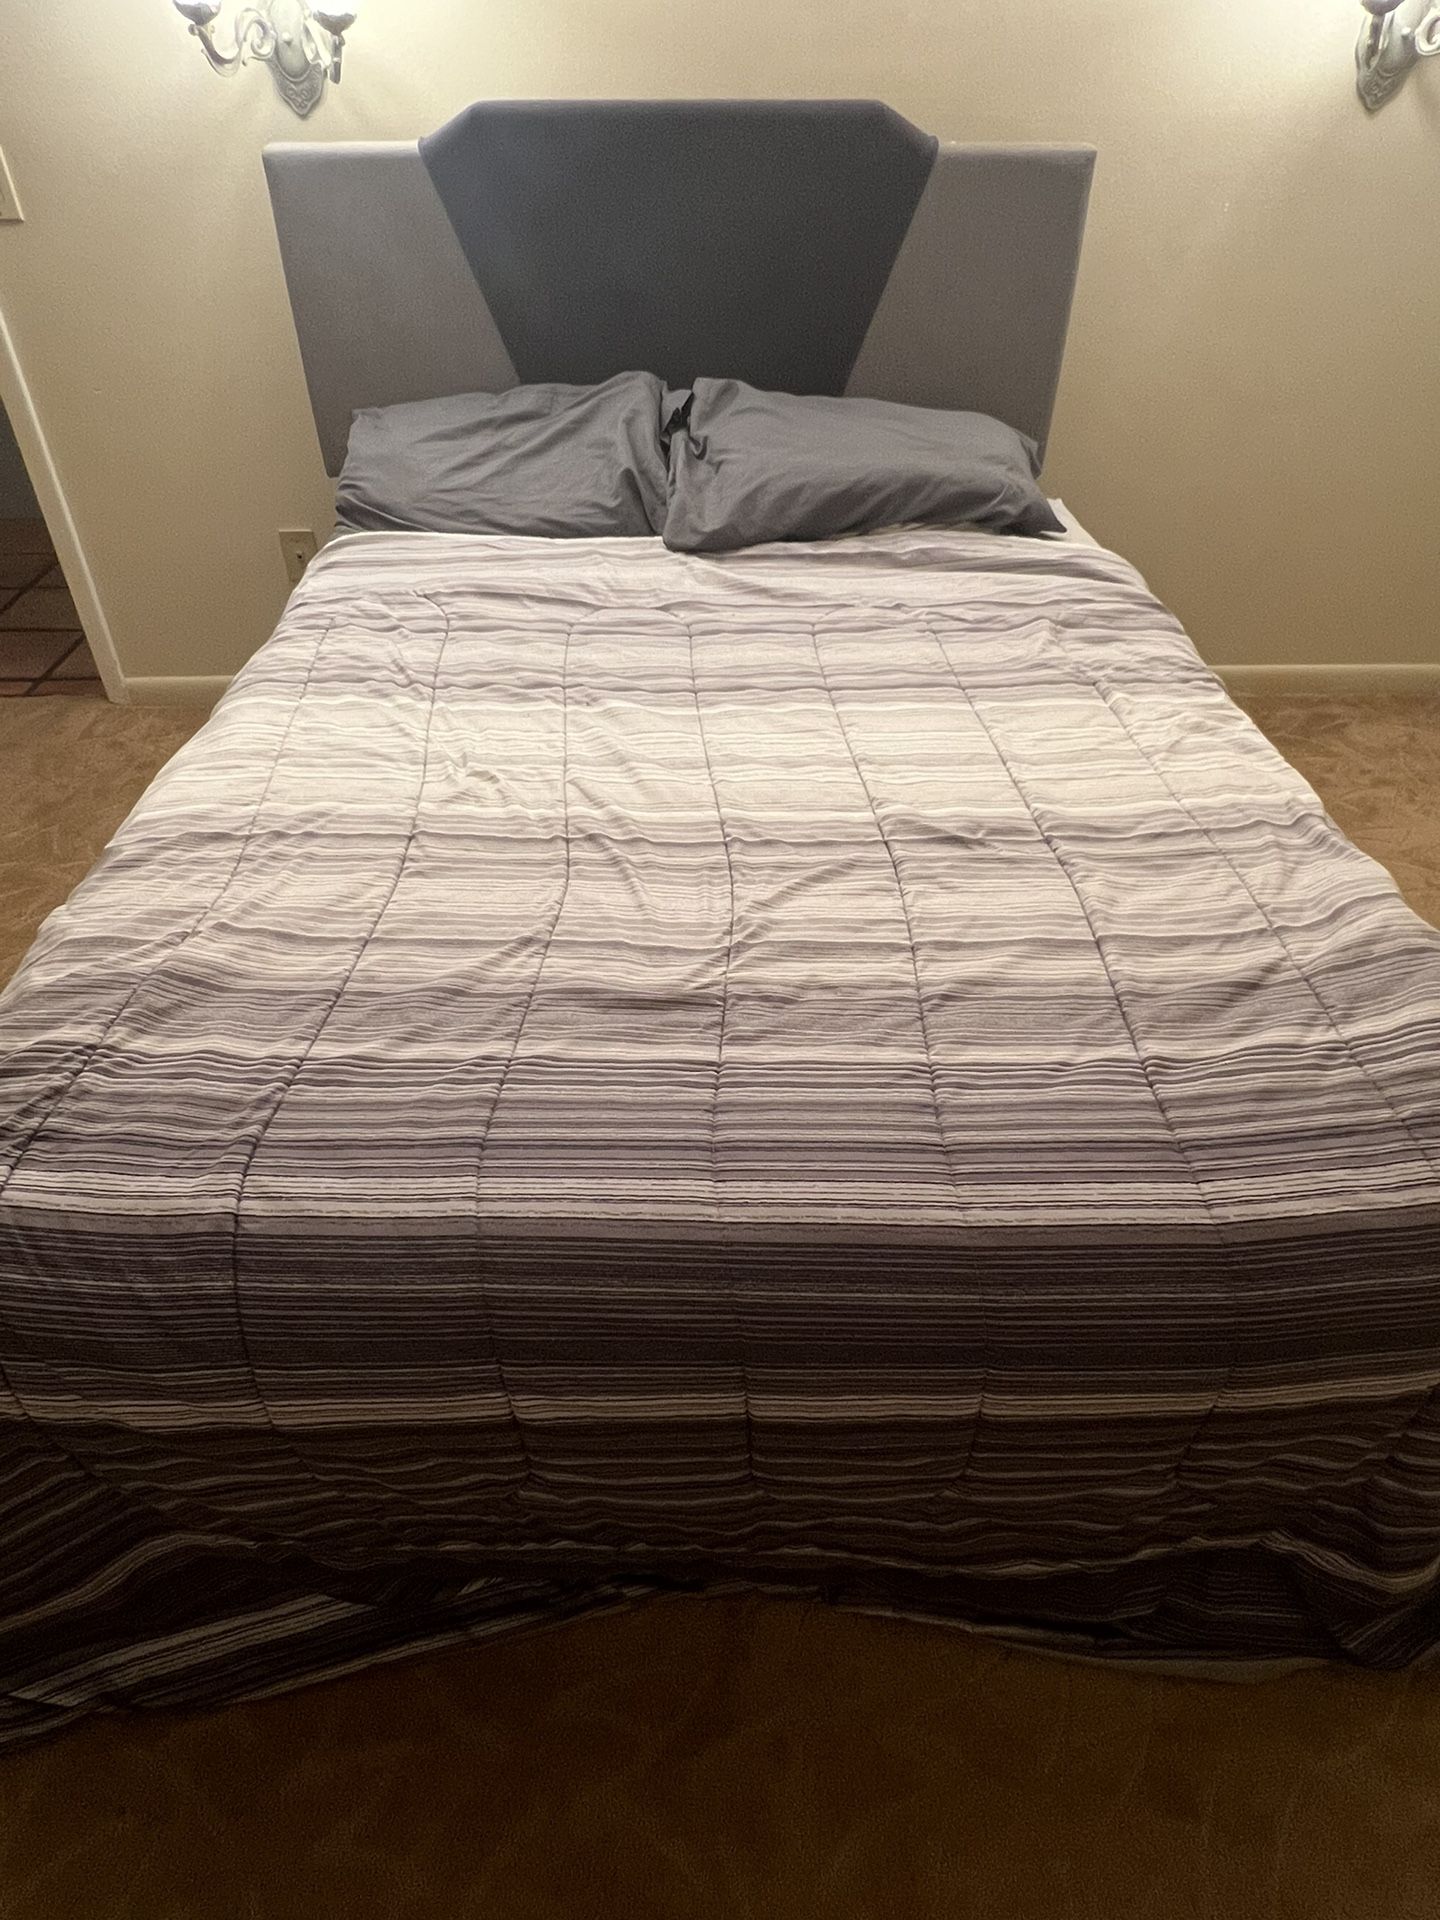 FULL SIZE BED IN GOOD CONDITION